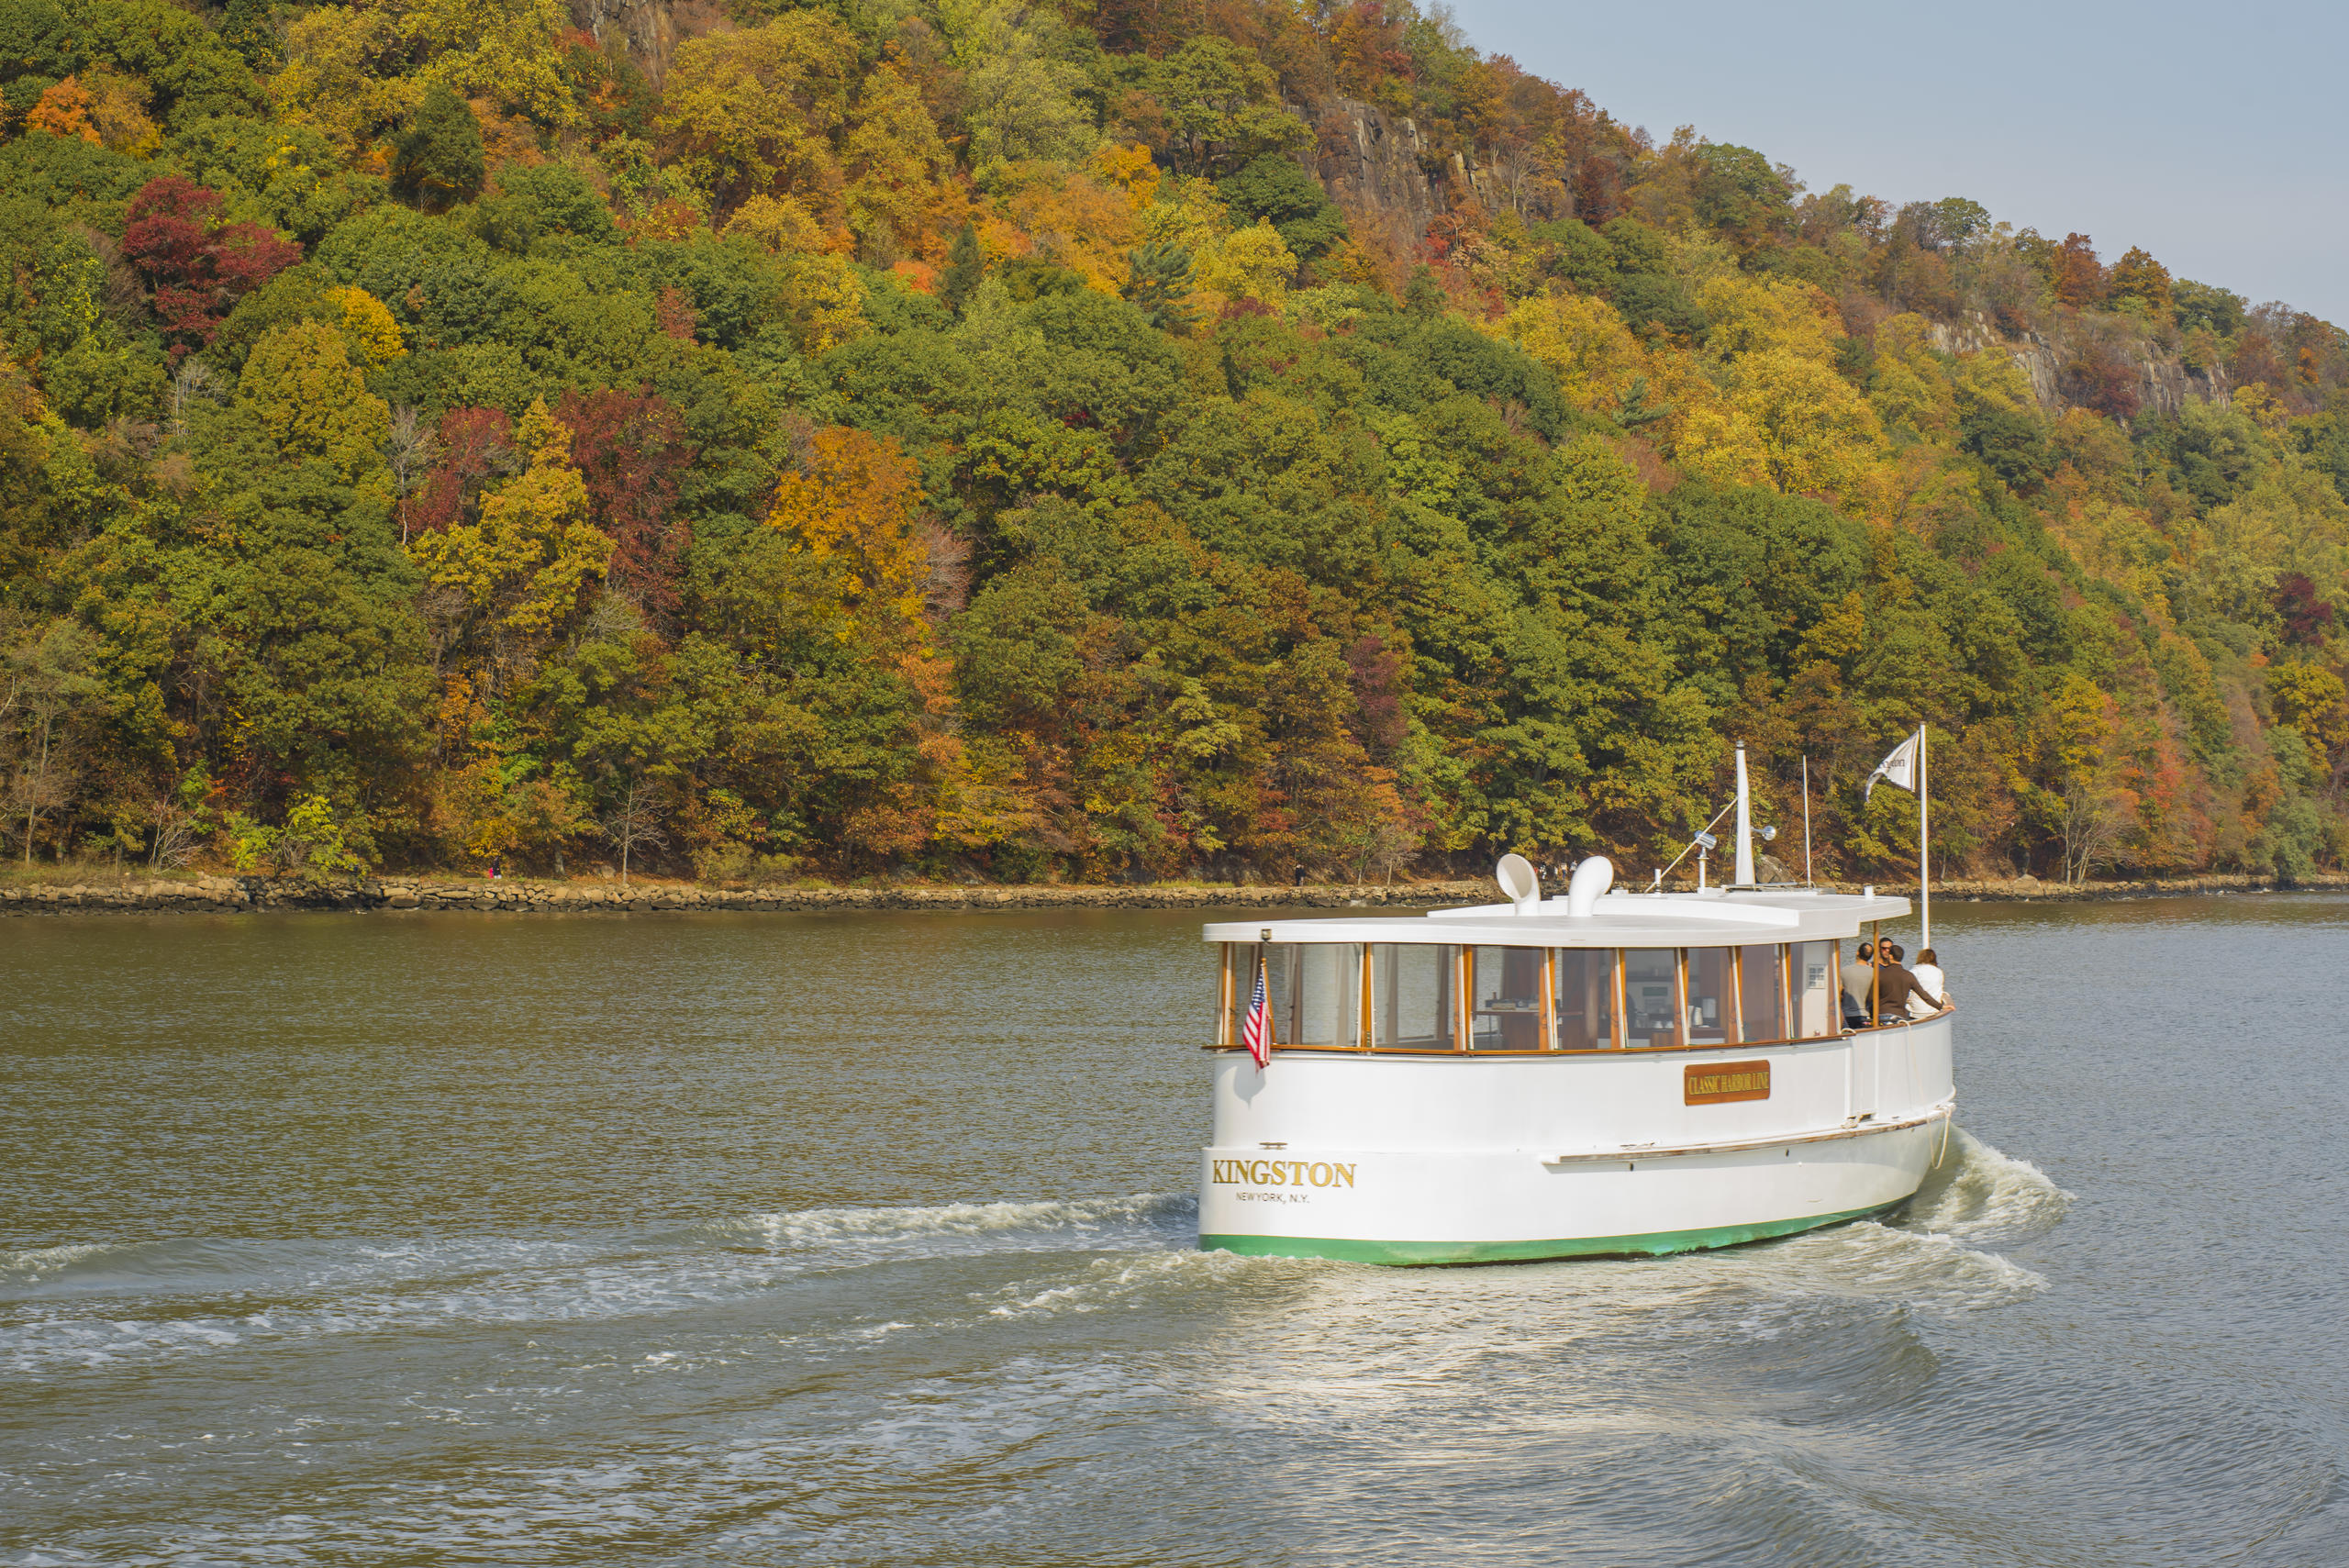 Fall Leafage Boat Cruise in New York